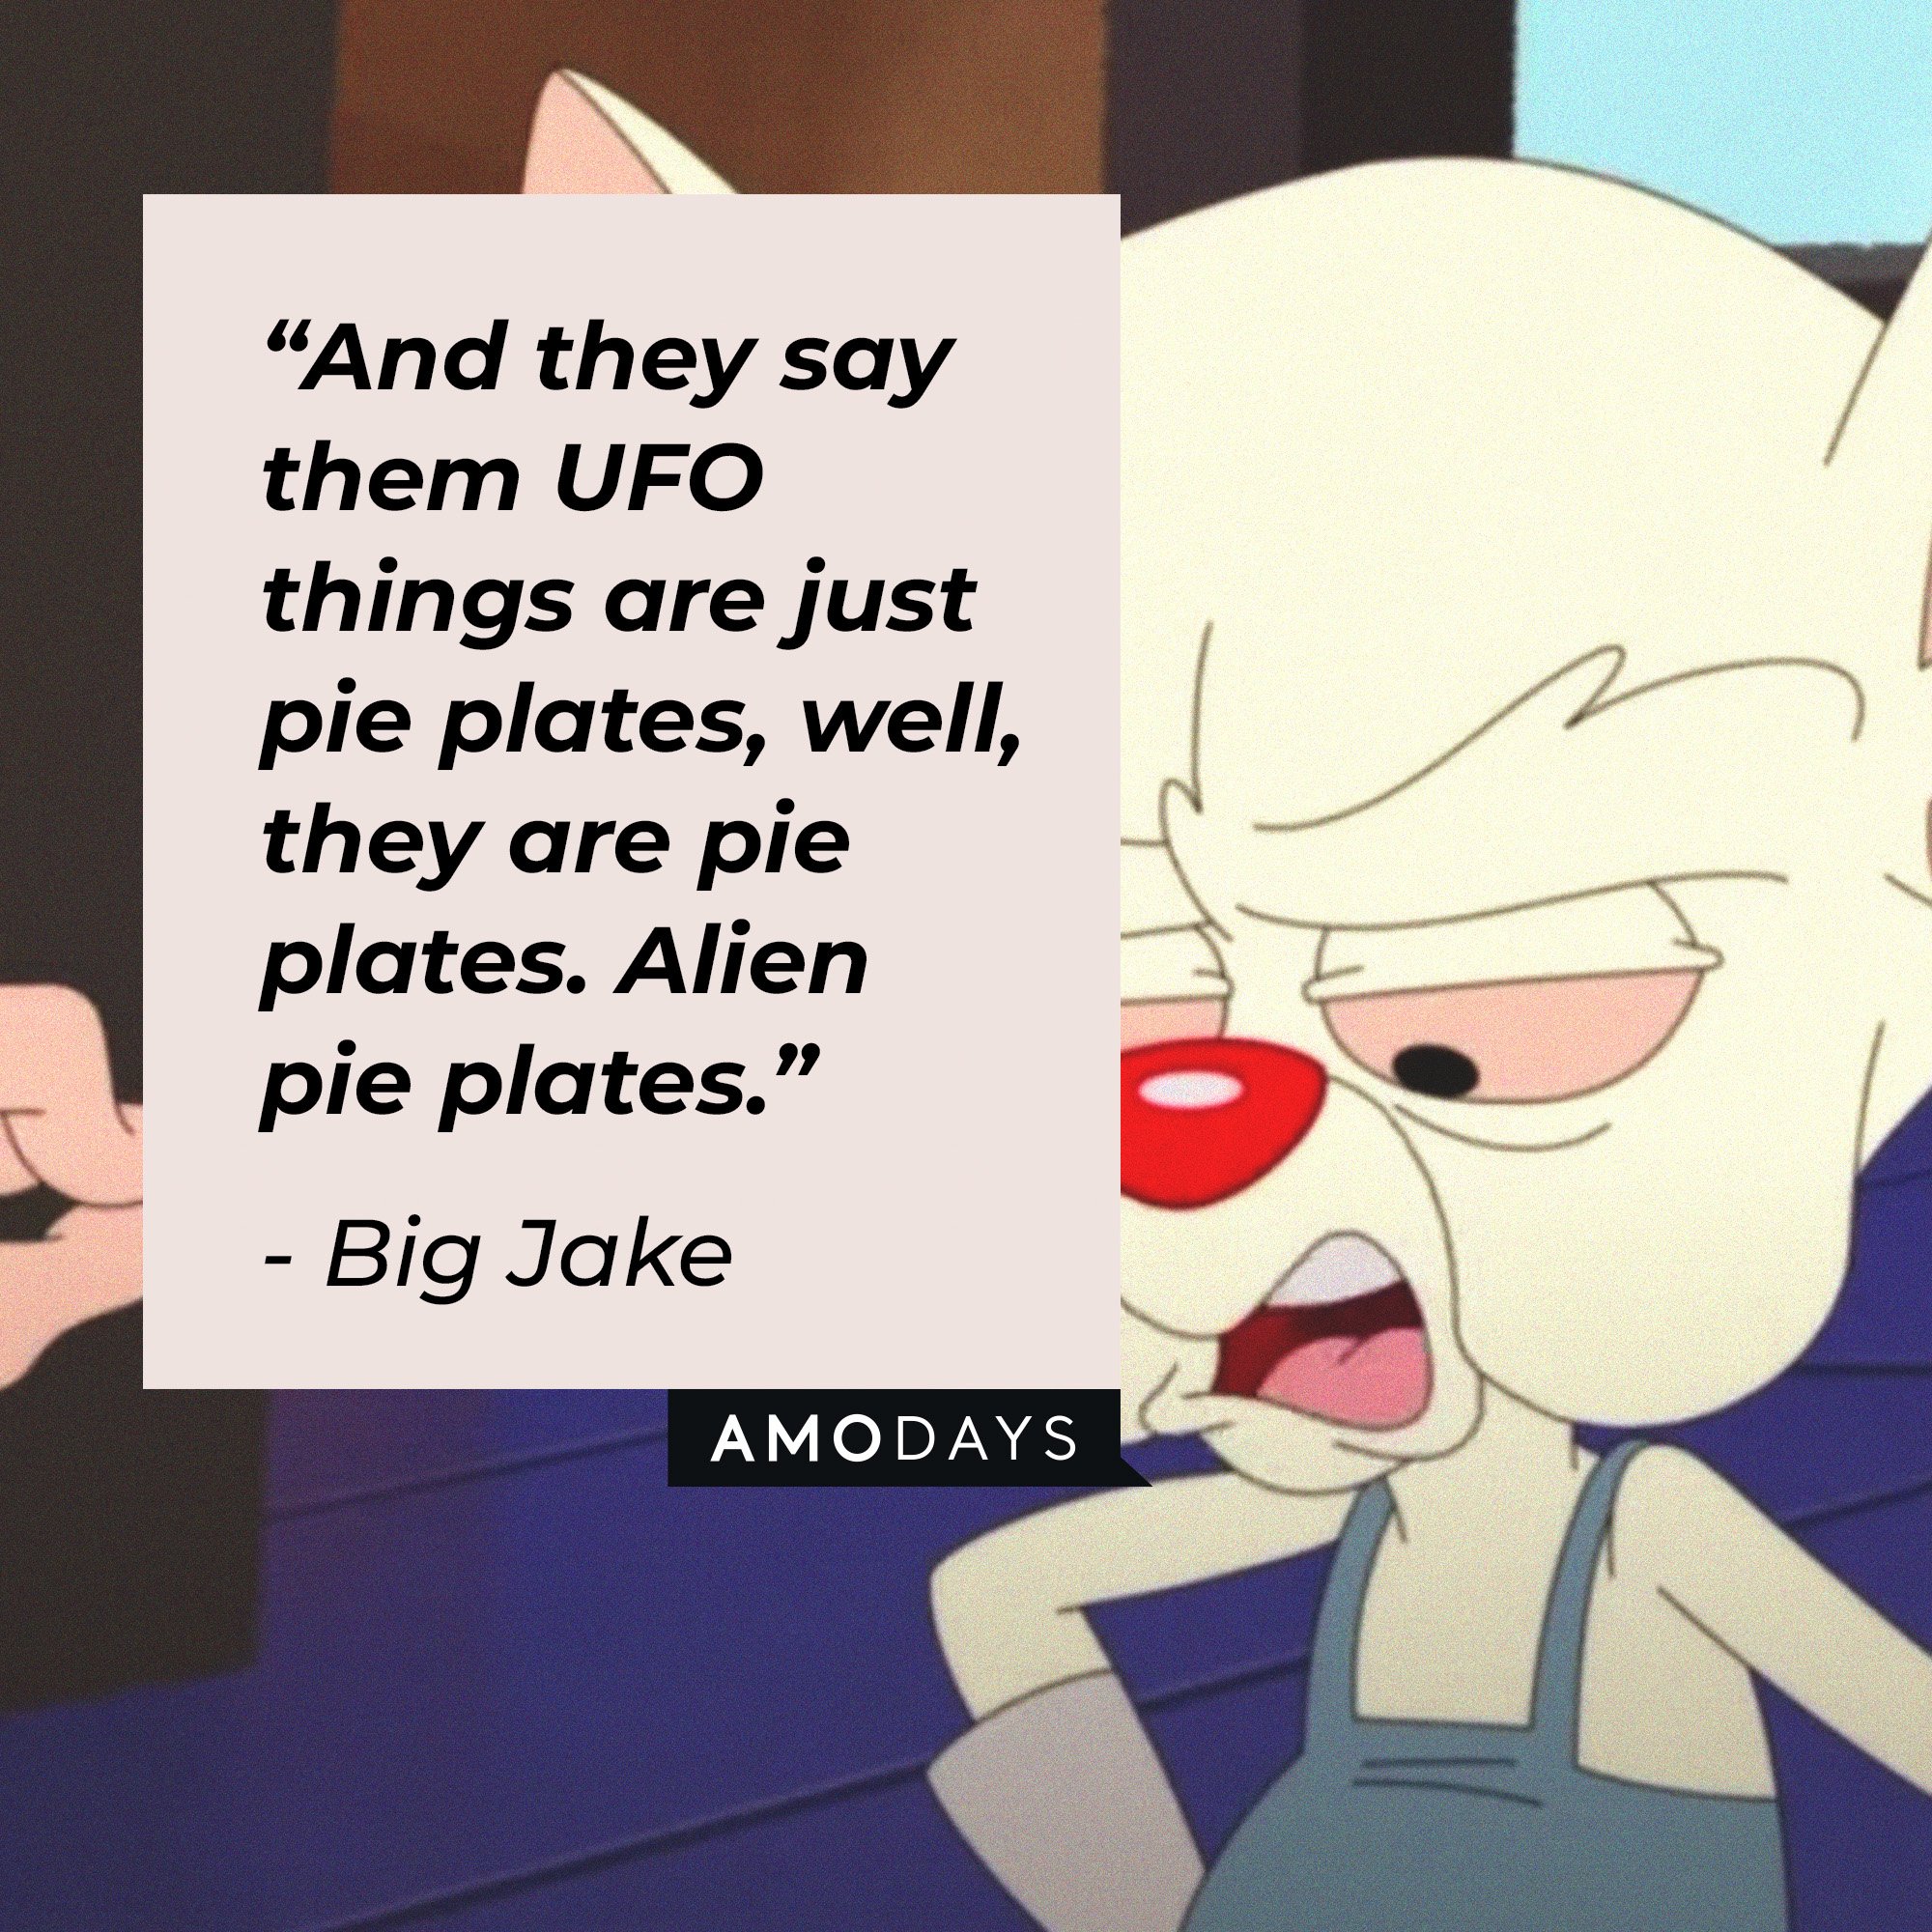 Big Jake's quote: “And they say them UFO things are just pie plates, well, they are pie plates. Alien pie plates.” | Image: AmoDays